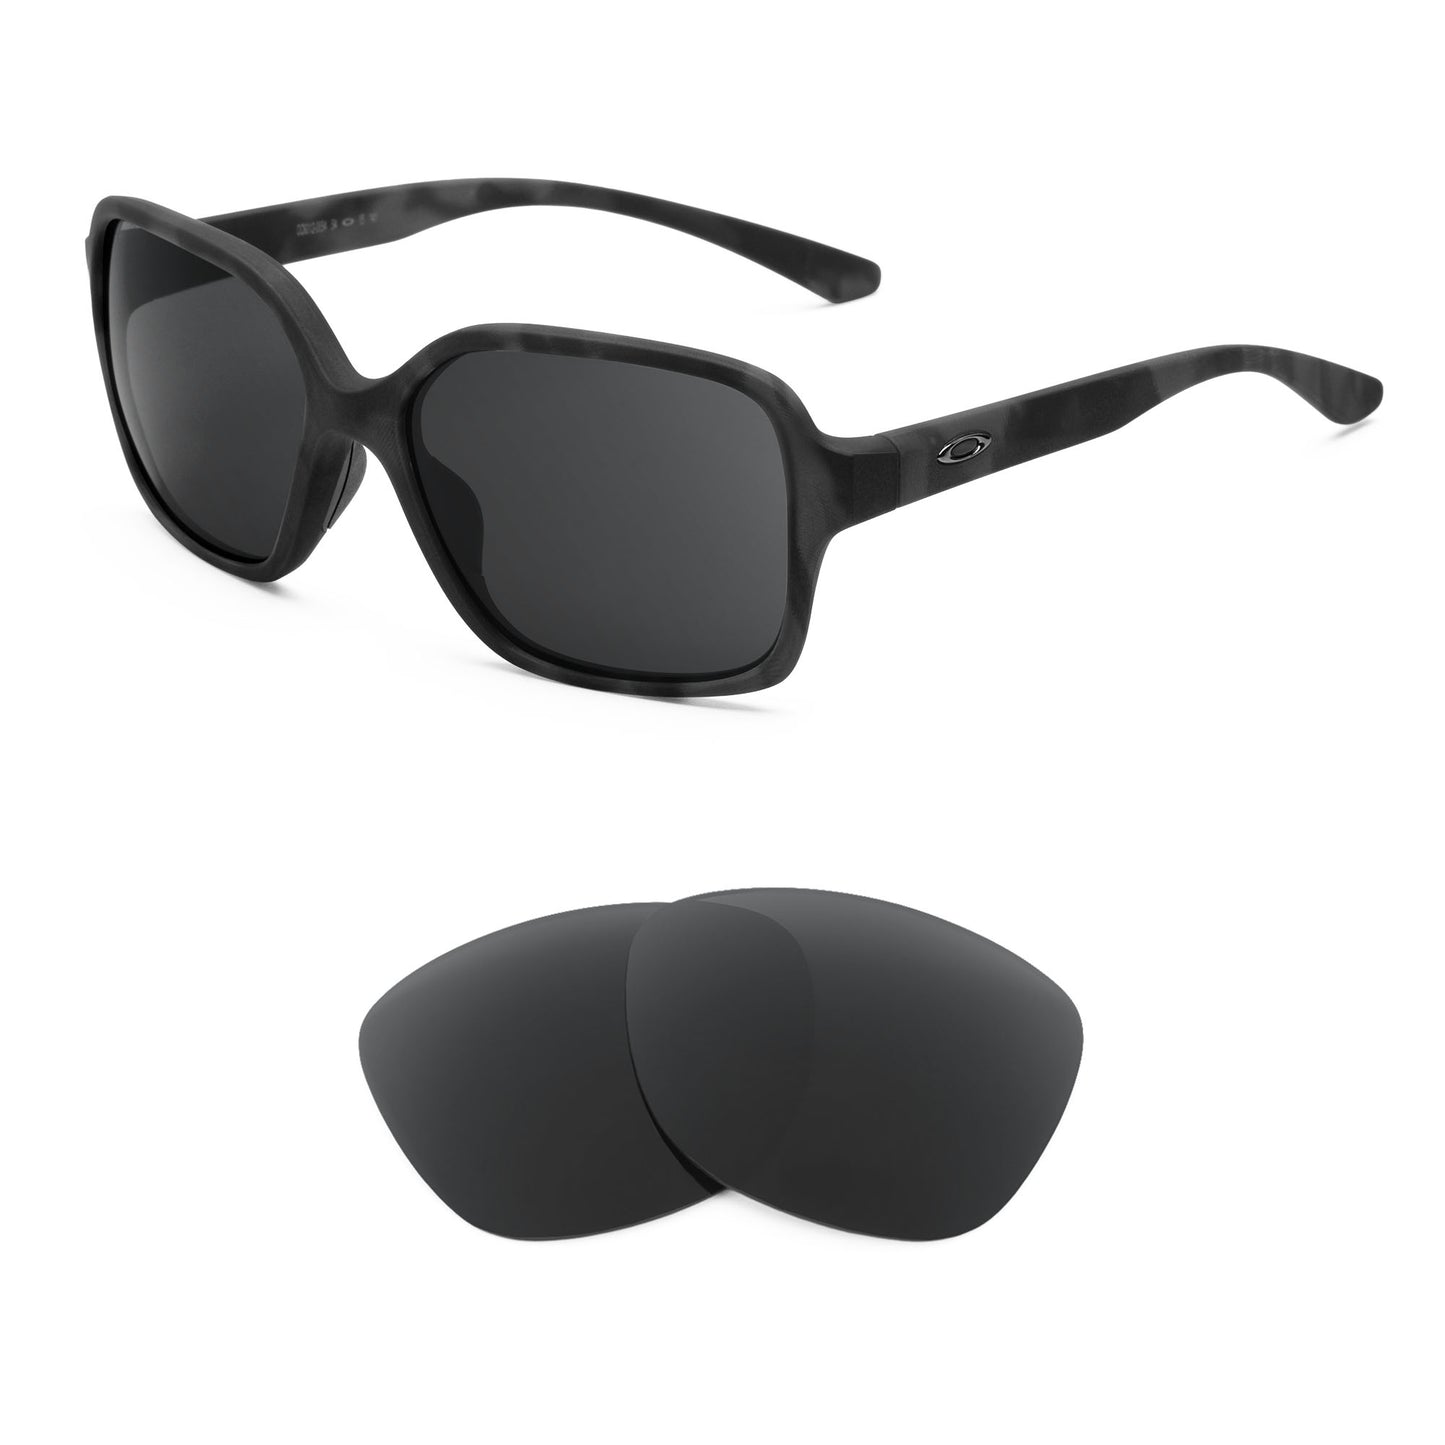 Oakley Proxy sunglasses with replacement lenses